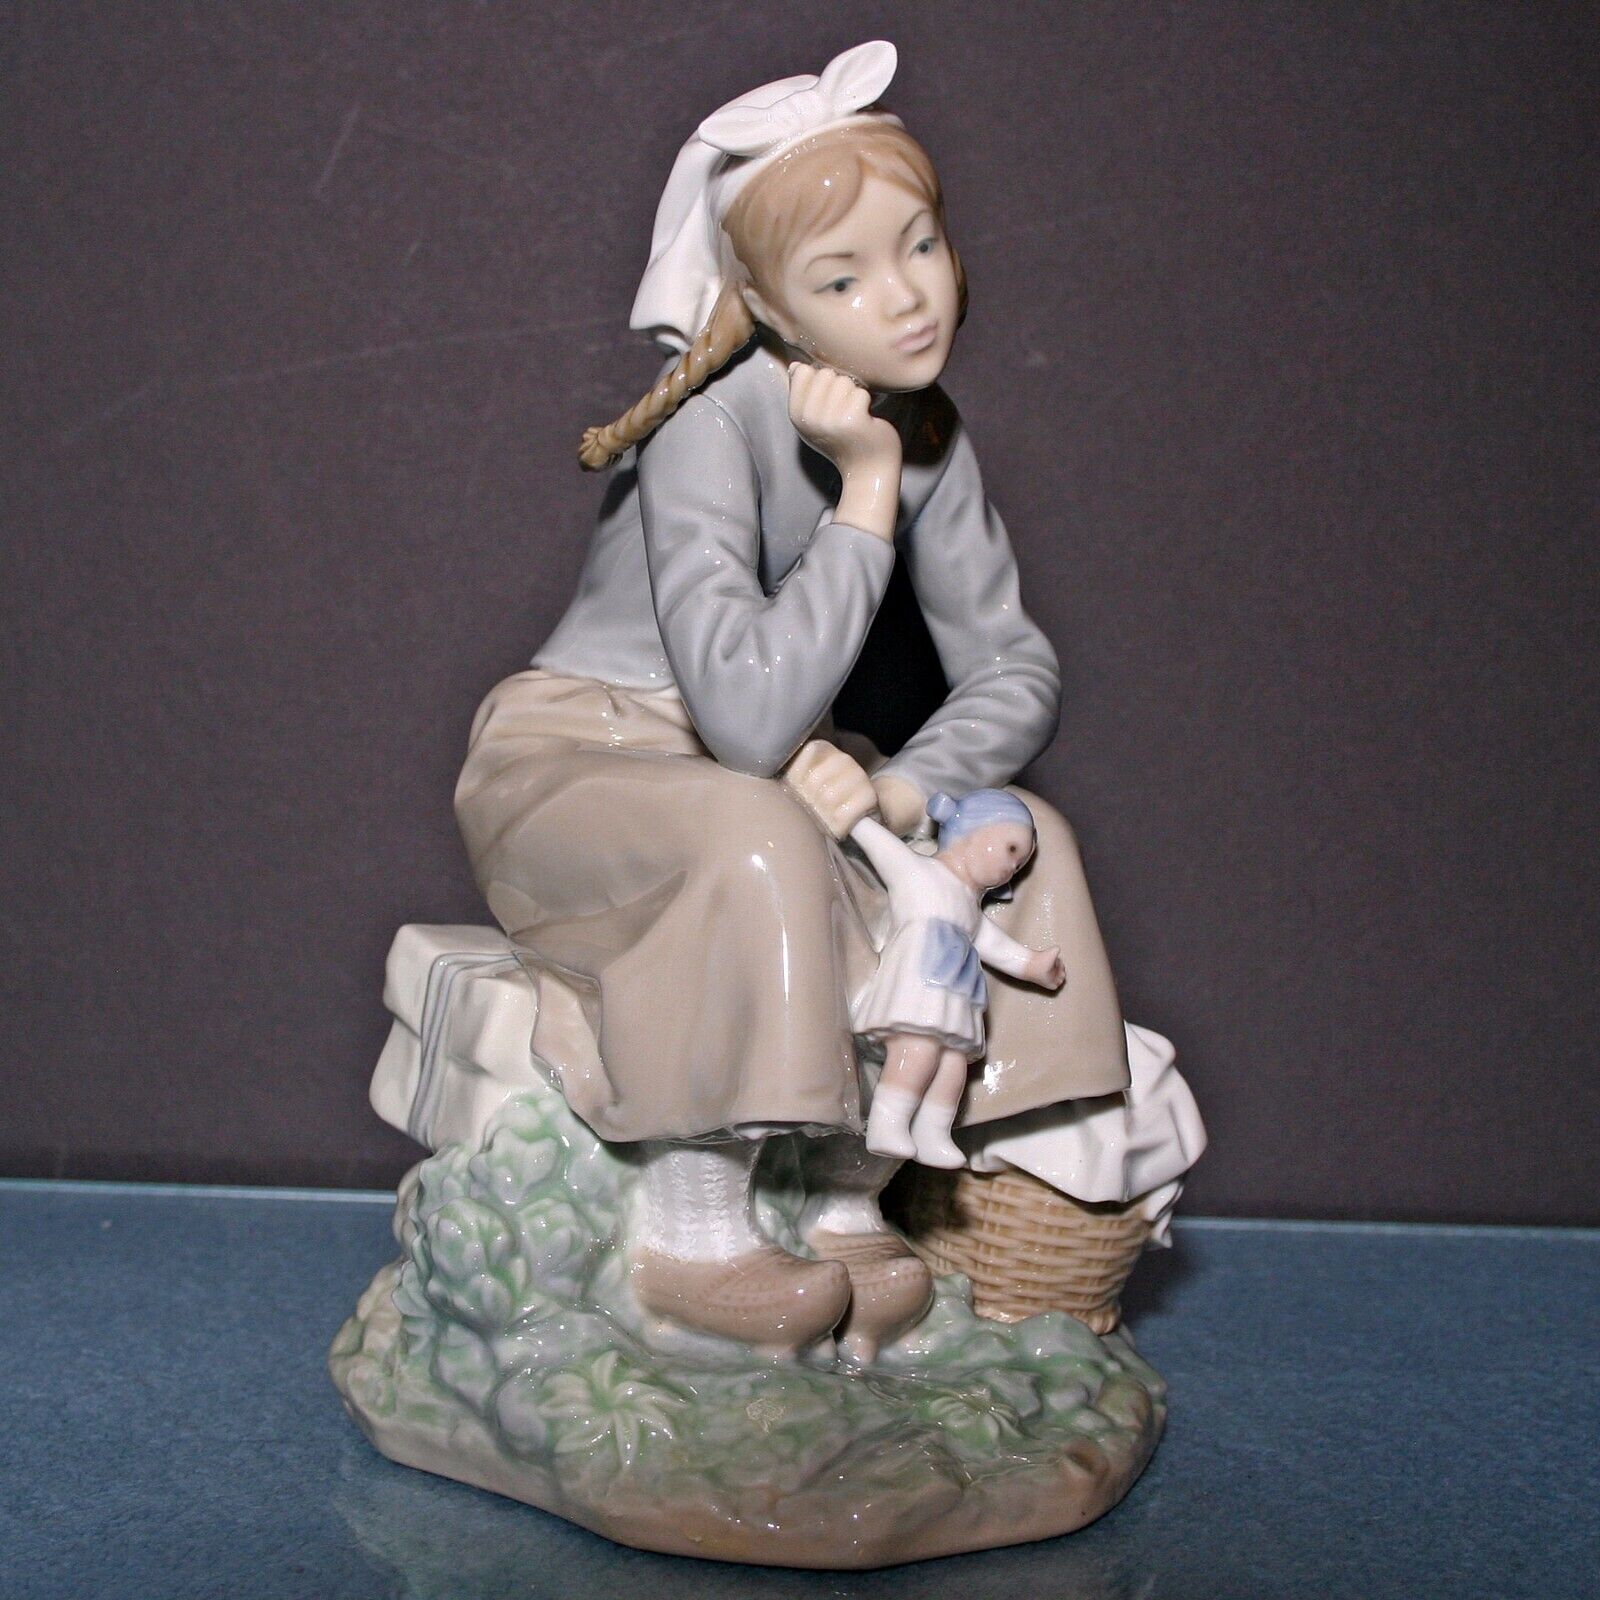 Lladro #1211 Girl with Doll glossy finish 9 inch EXCELLENT